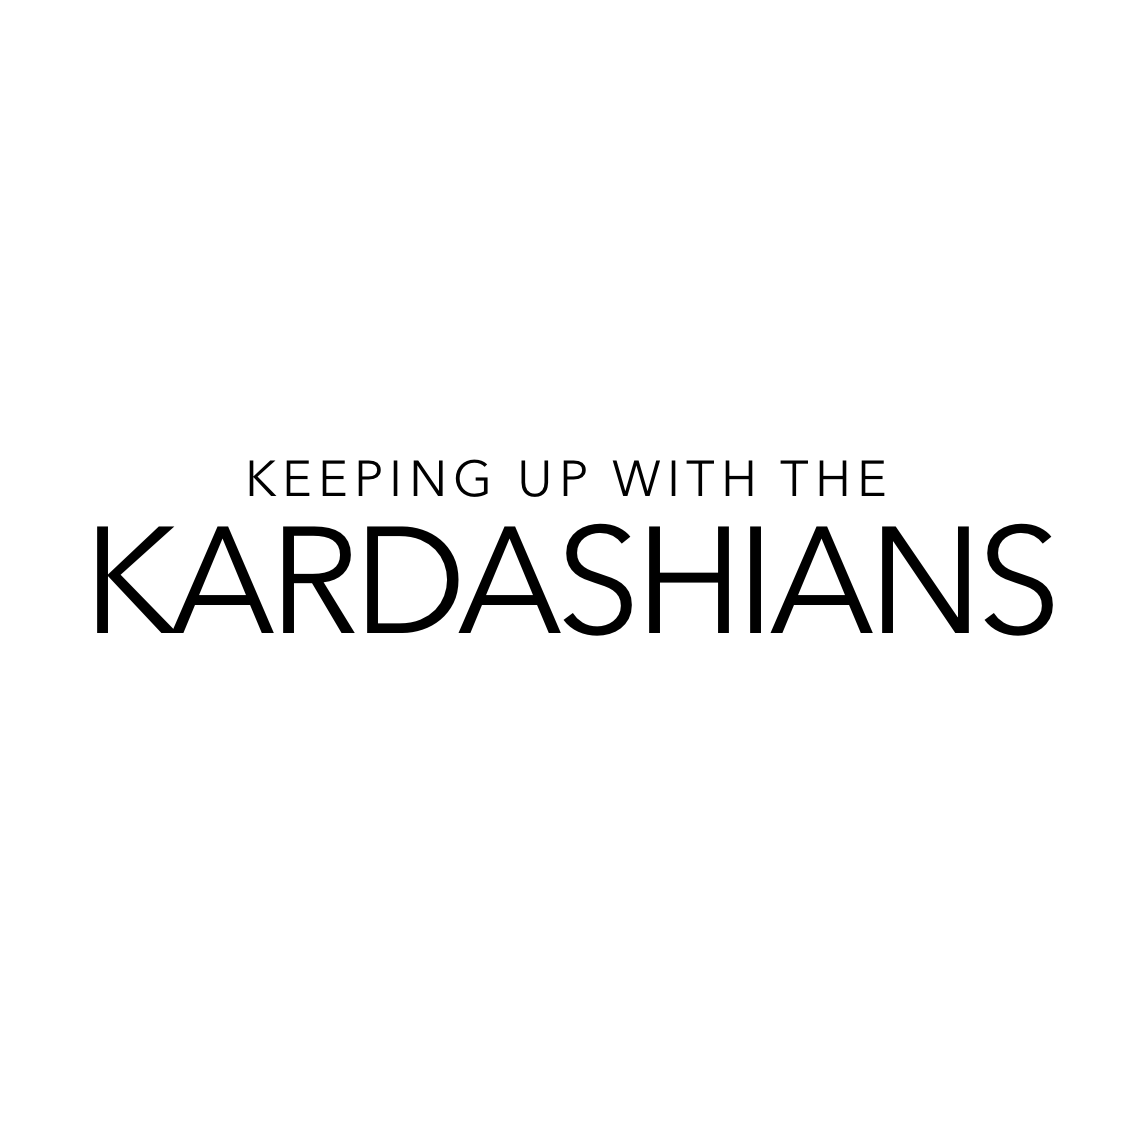 When is the next episode of Keeping Up with the Kardashians? Is it on TONIGHT?